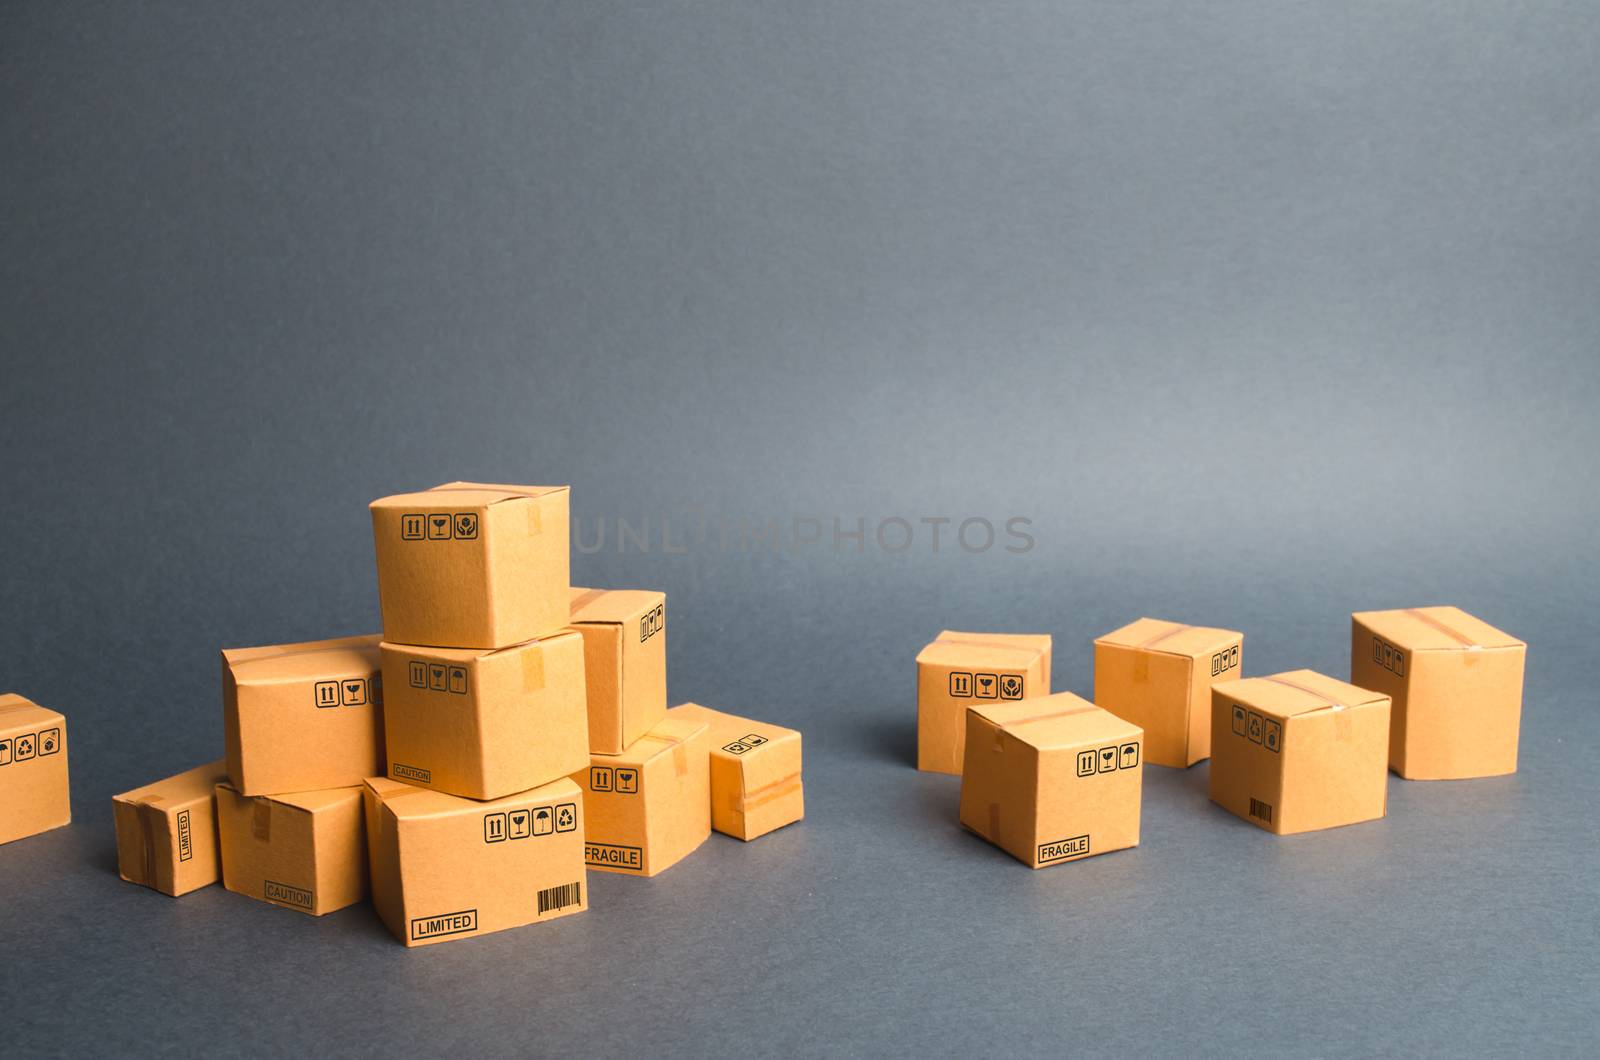 Many cardboard boxes. products, goods, commerce and retail. E-commerce, sale of goods through online trading platform. Freight shipping, deliver. sales of goods and services. Warehouse, stock